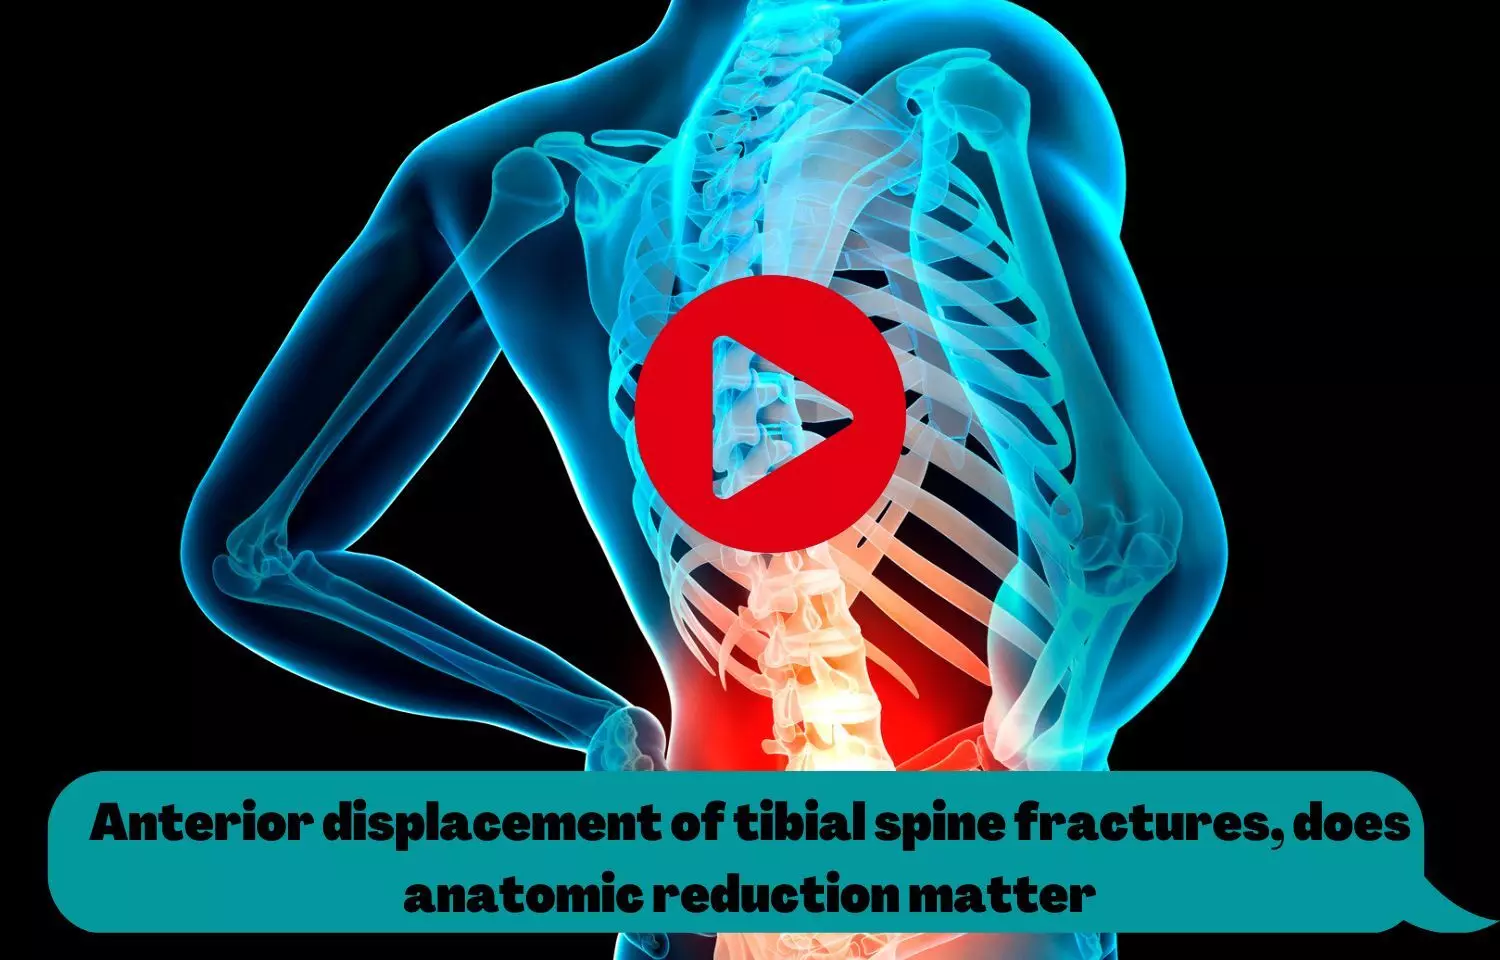 Anterior displacement of tibial spine fractures, does anatomic reduction matter